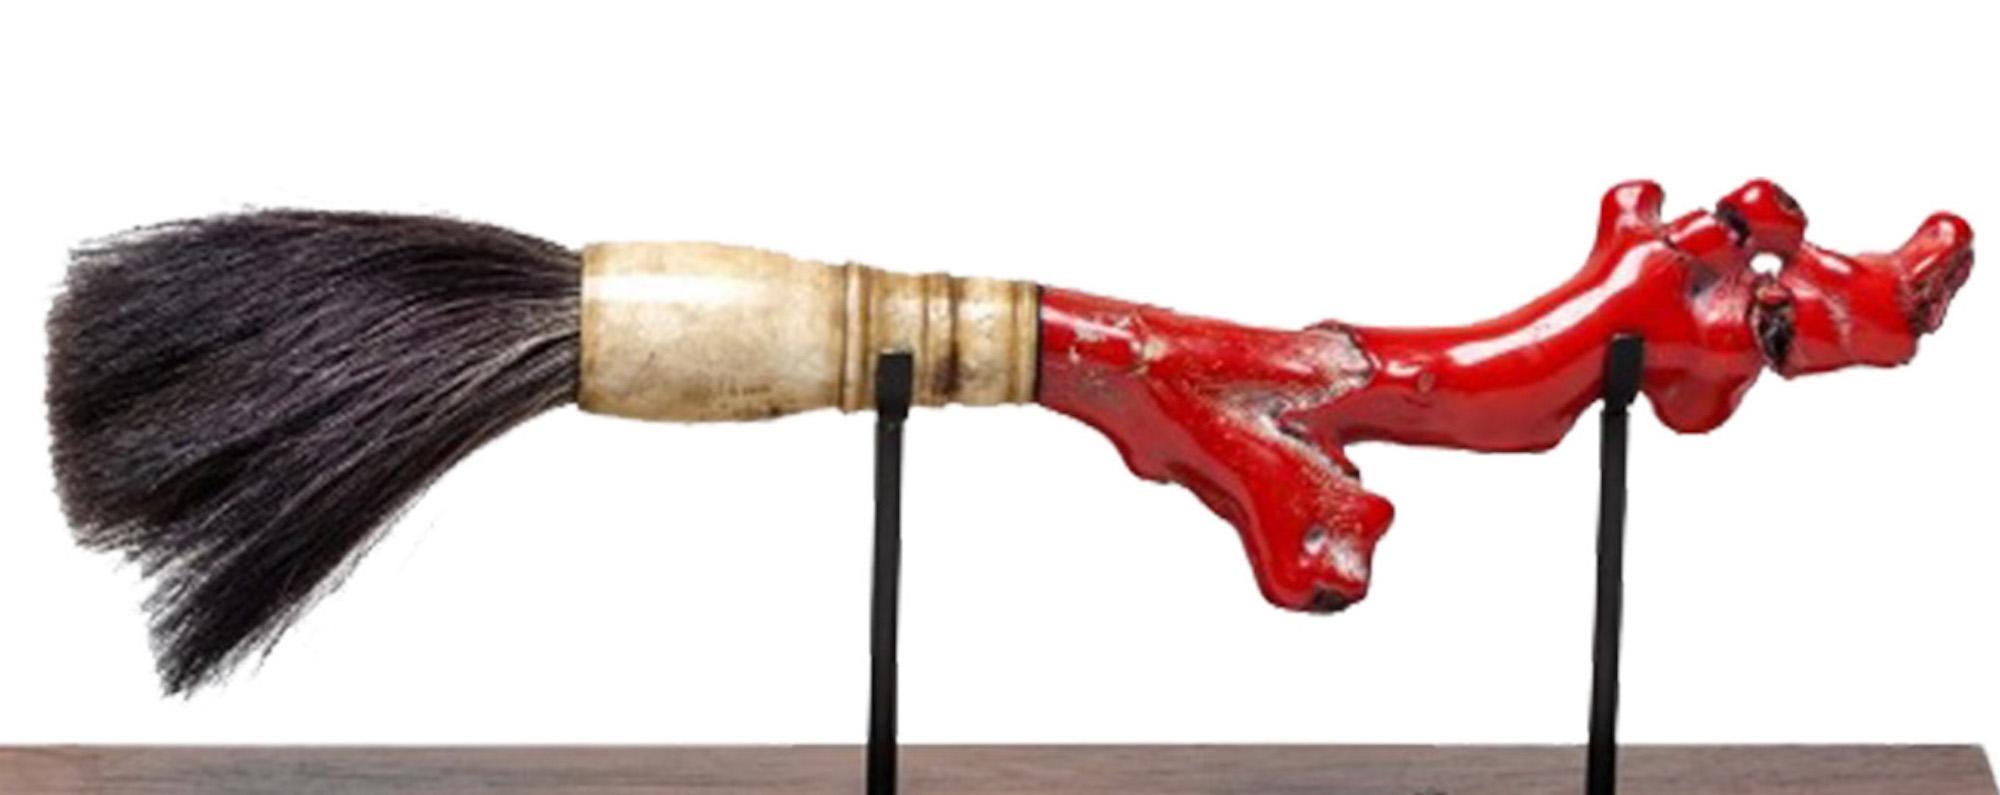 Asian Calligraphy brush with made with red sea coral handle. 

Period: 19th century.

This object is shipped from Italy. Under existing legislation, any object in Italy created over 70 years ago by an artist who has died requires a licence for